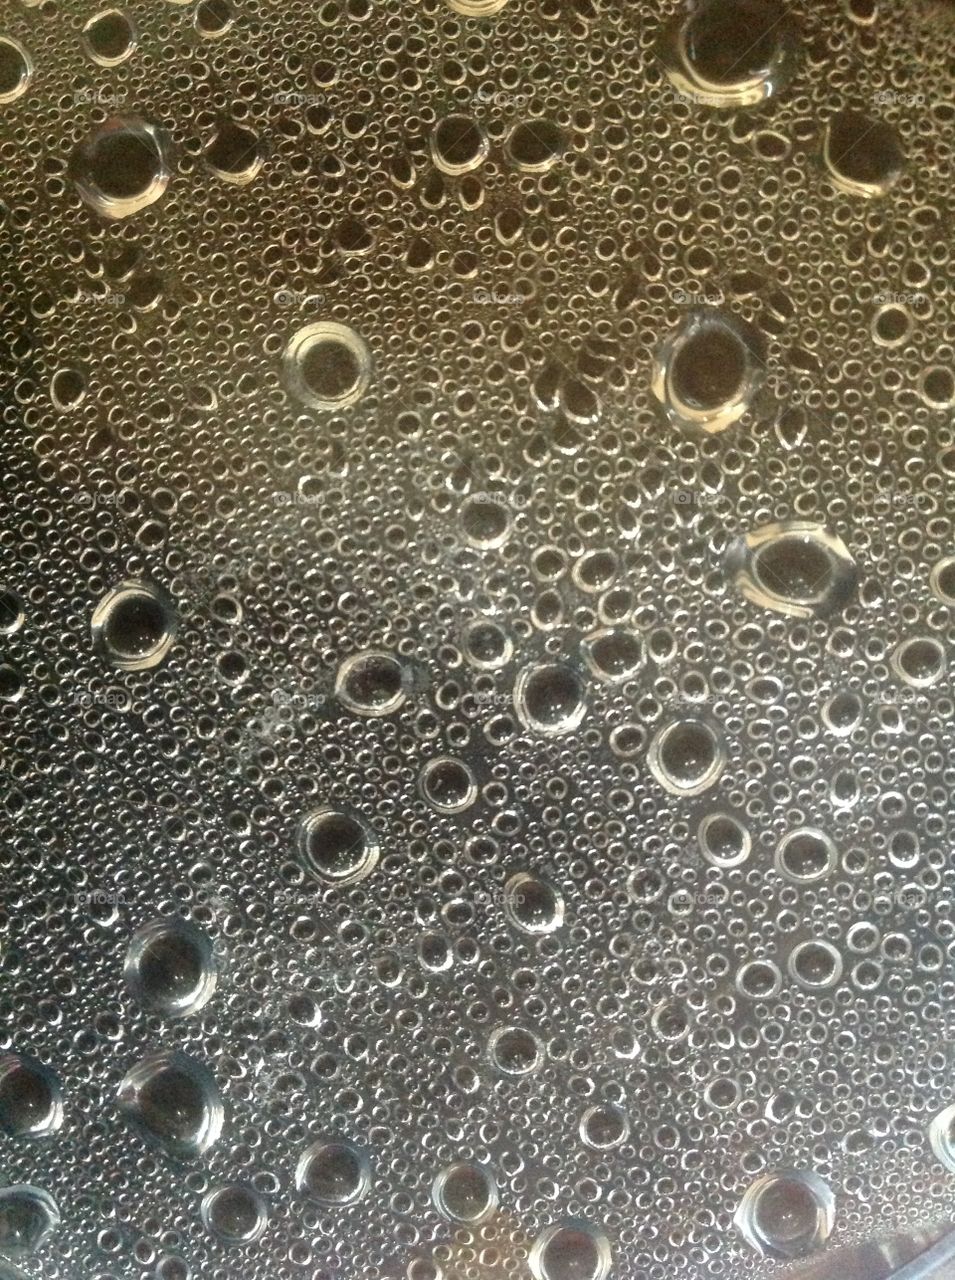 Beautiful pattern formation created by droplets from condensation of water vapor on lid of container.